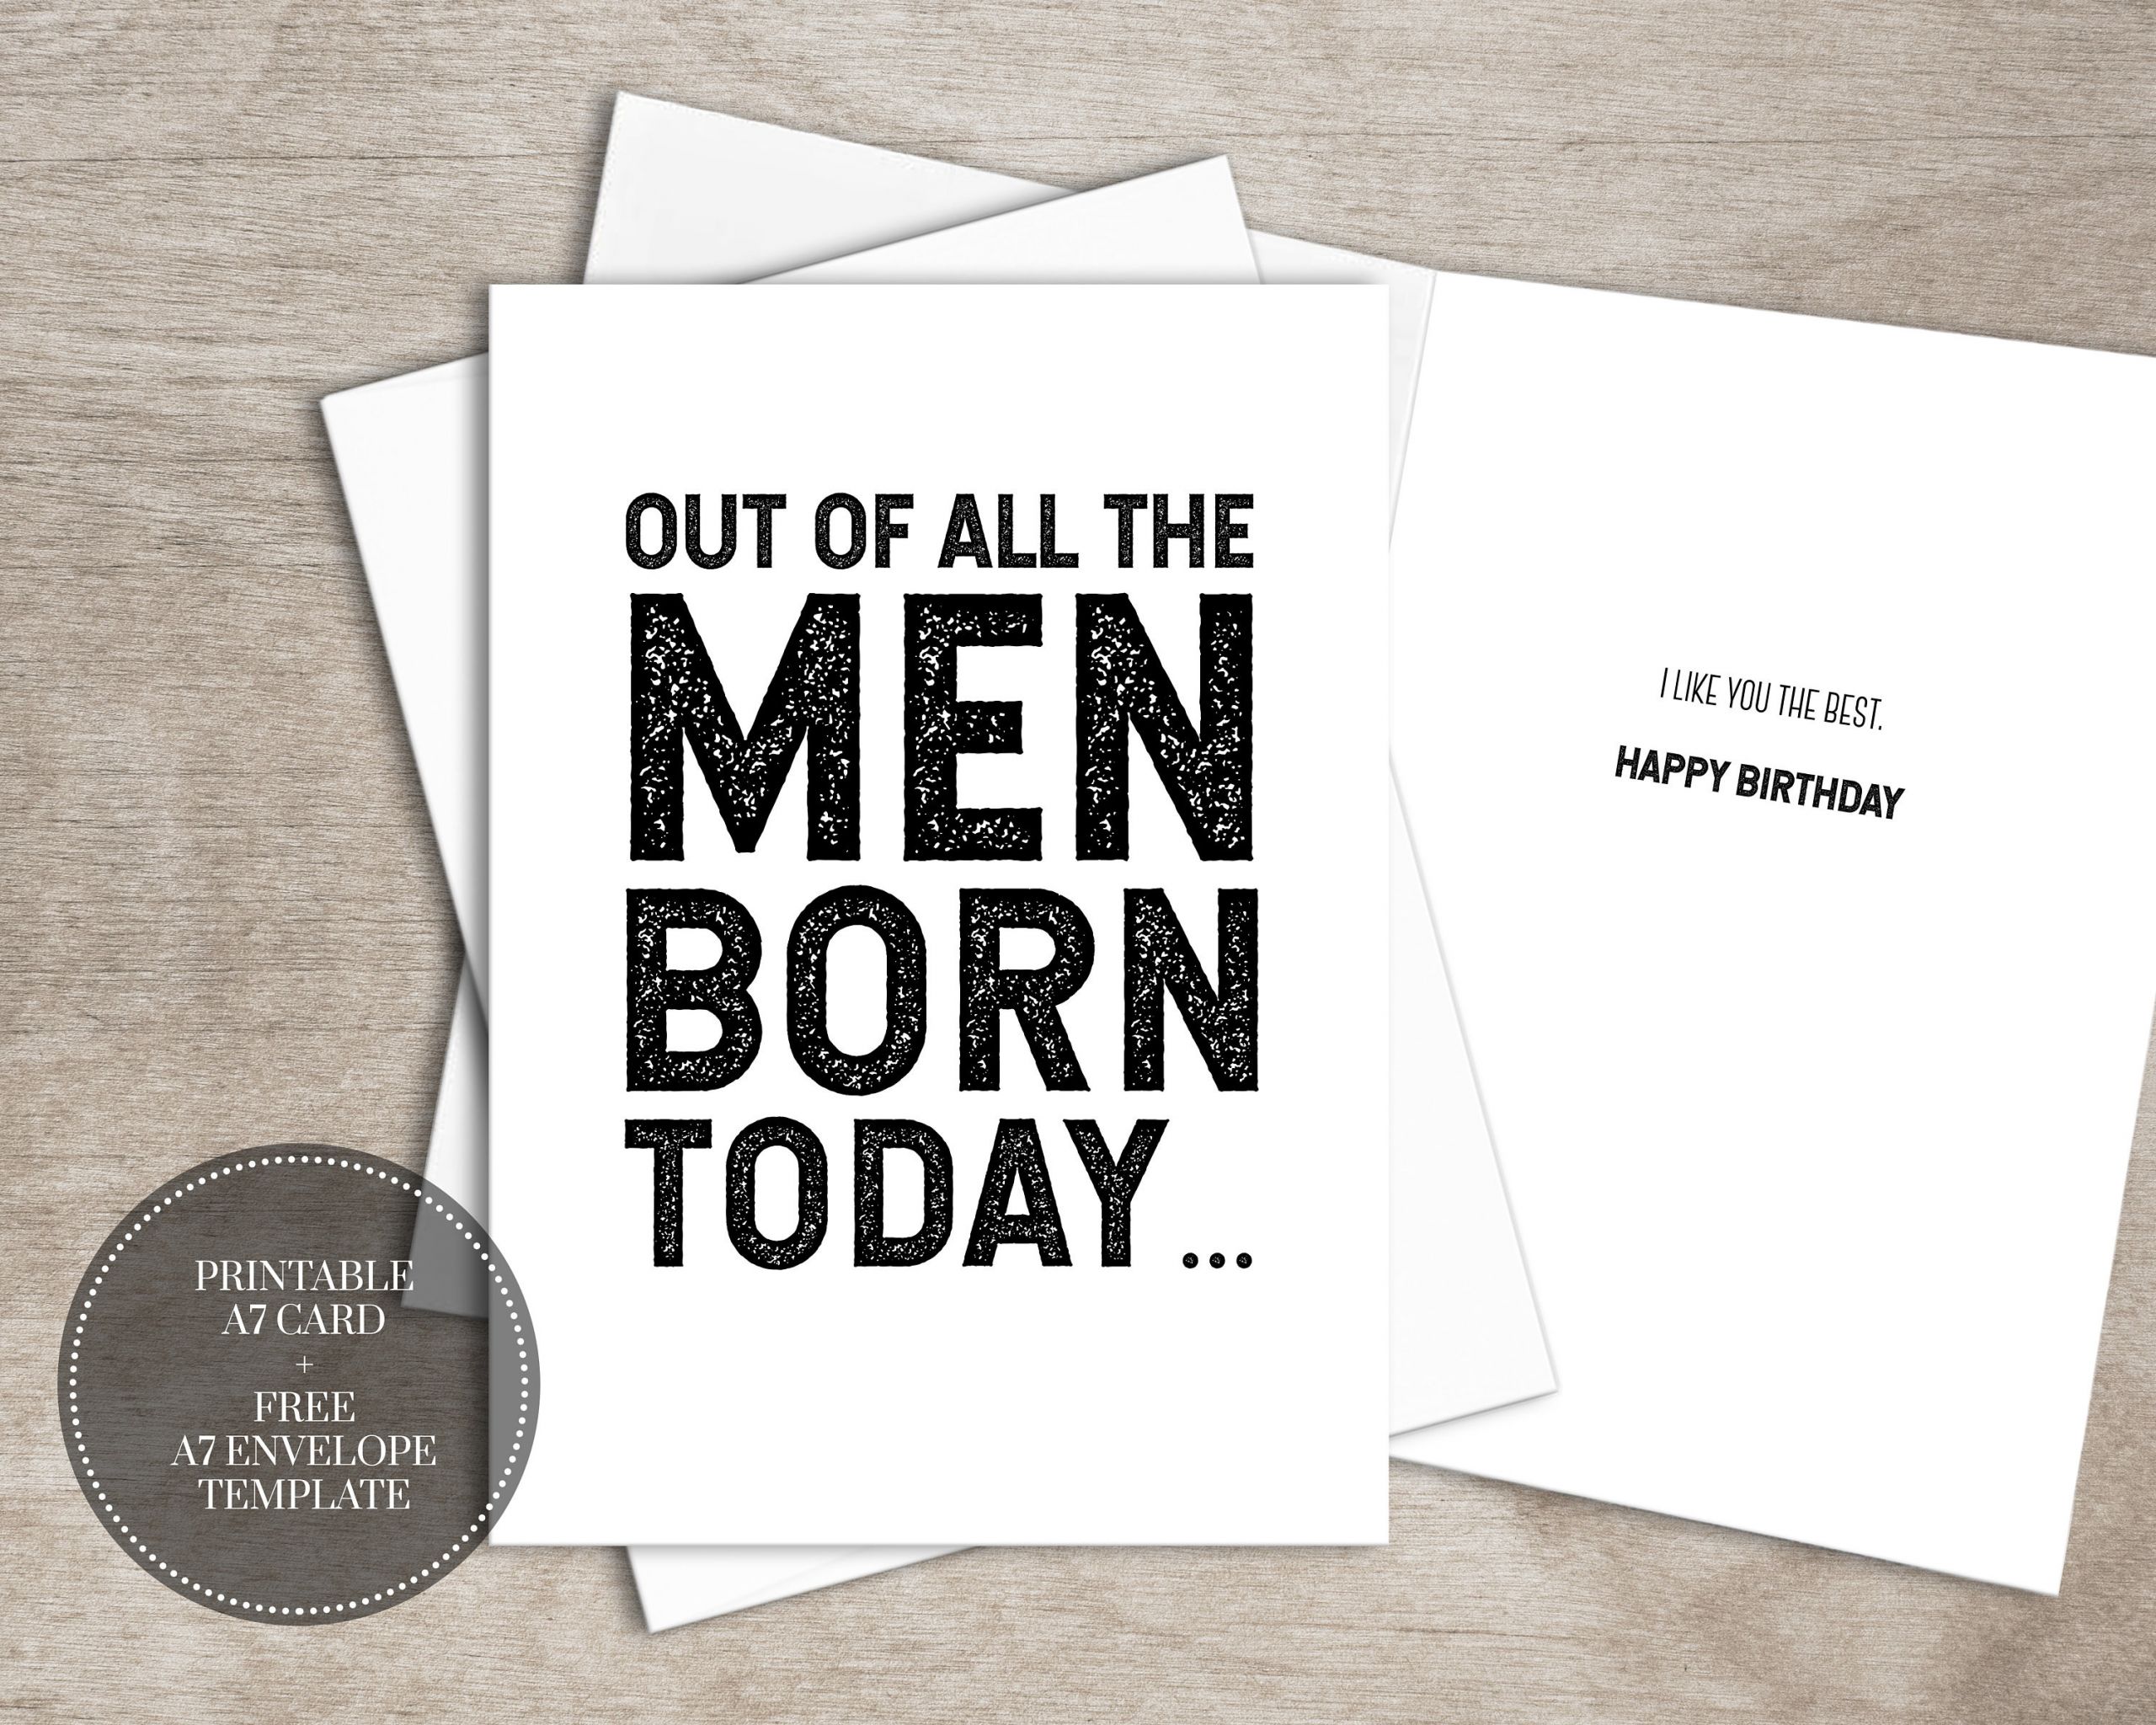 Printable Birthday Cards Funny
 PRINTABLE Funny Birthday Card INSTANT DOWNLOAD Birthday